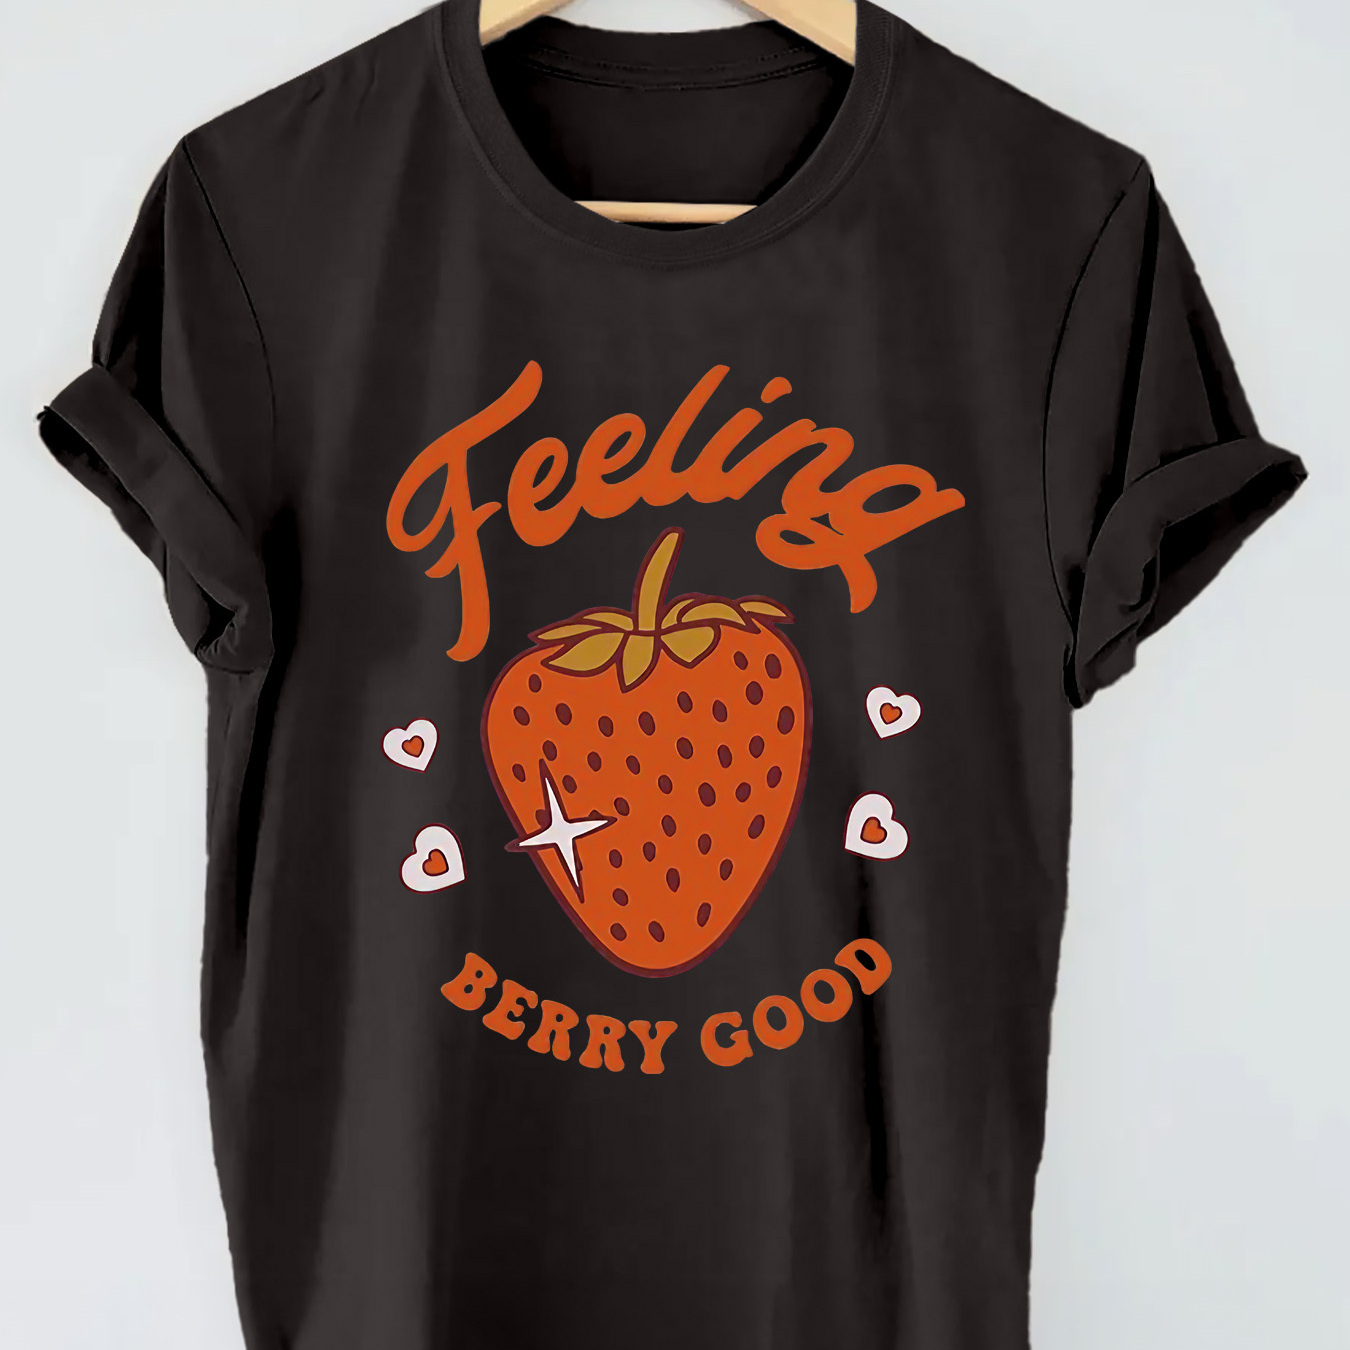 

Strawberry Graphic Print T-shirt, Short Sleeve Crew Neck Casual Top For Summer & Spring, Women's Clothing